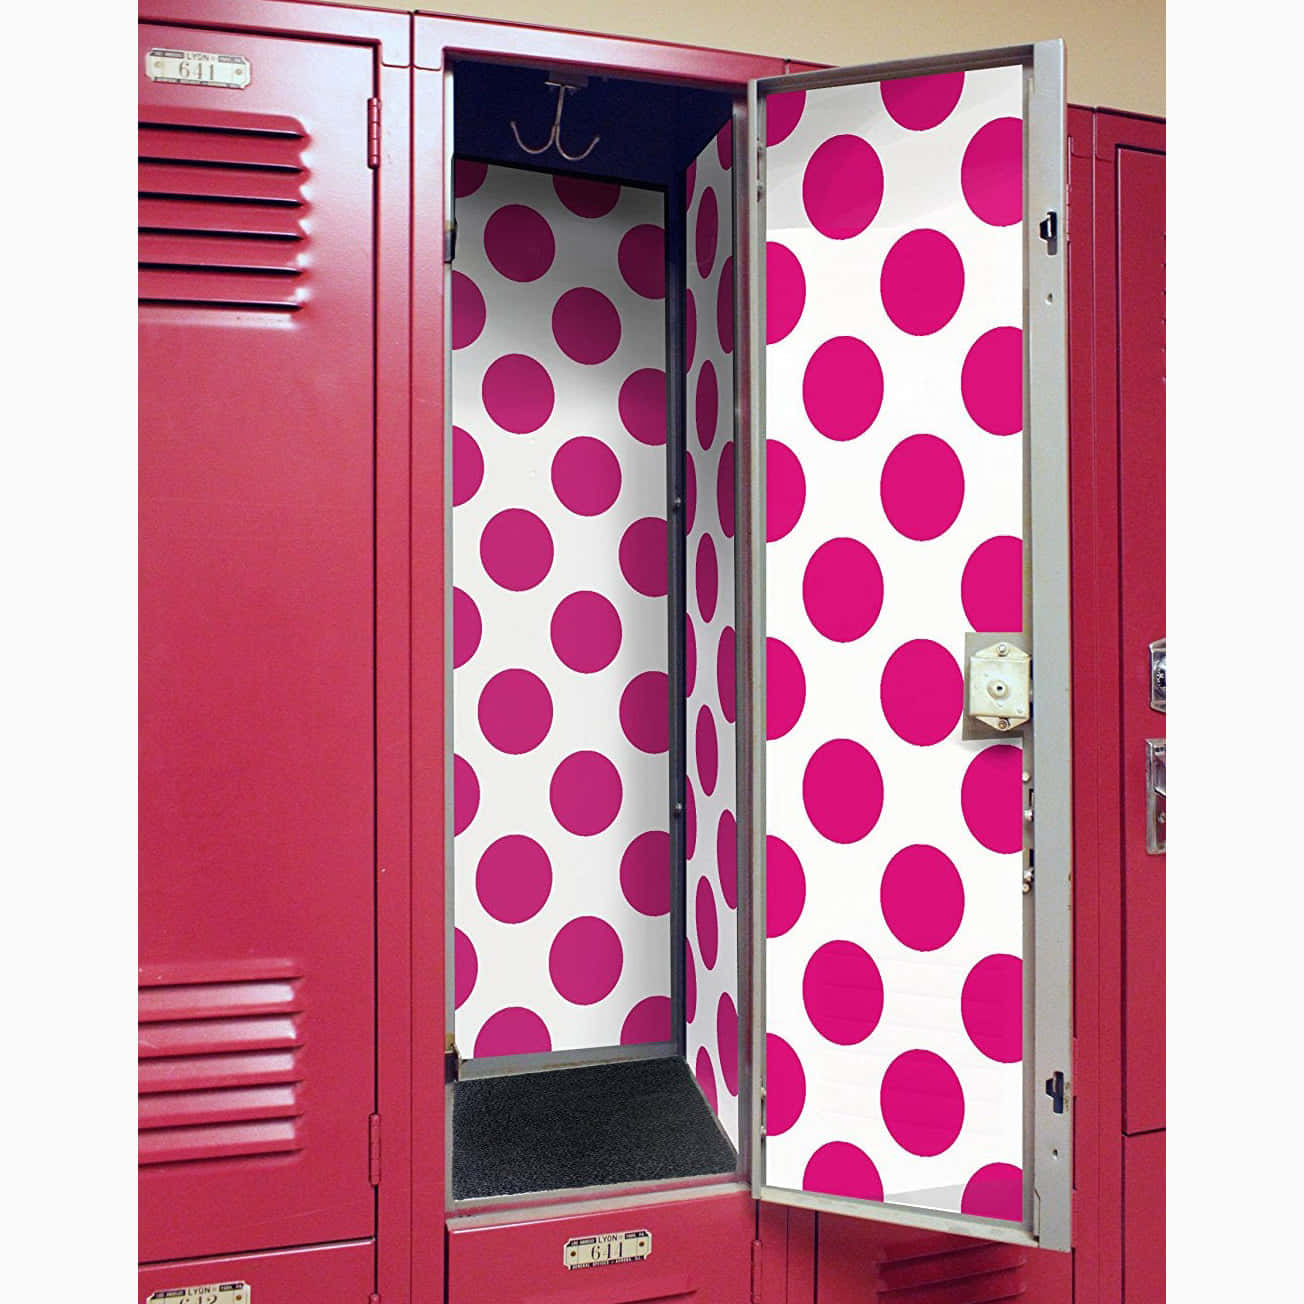 Lockers create an organized and secure environment